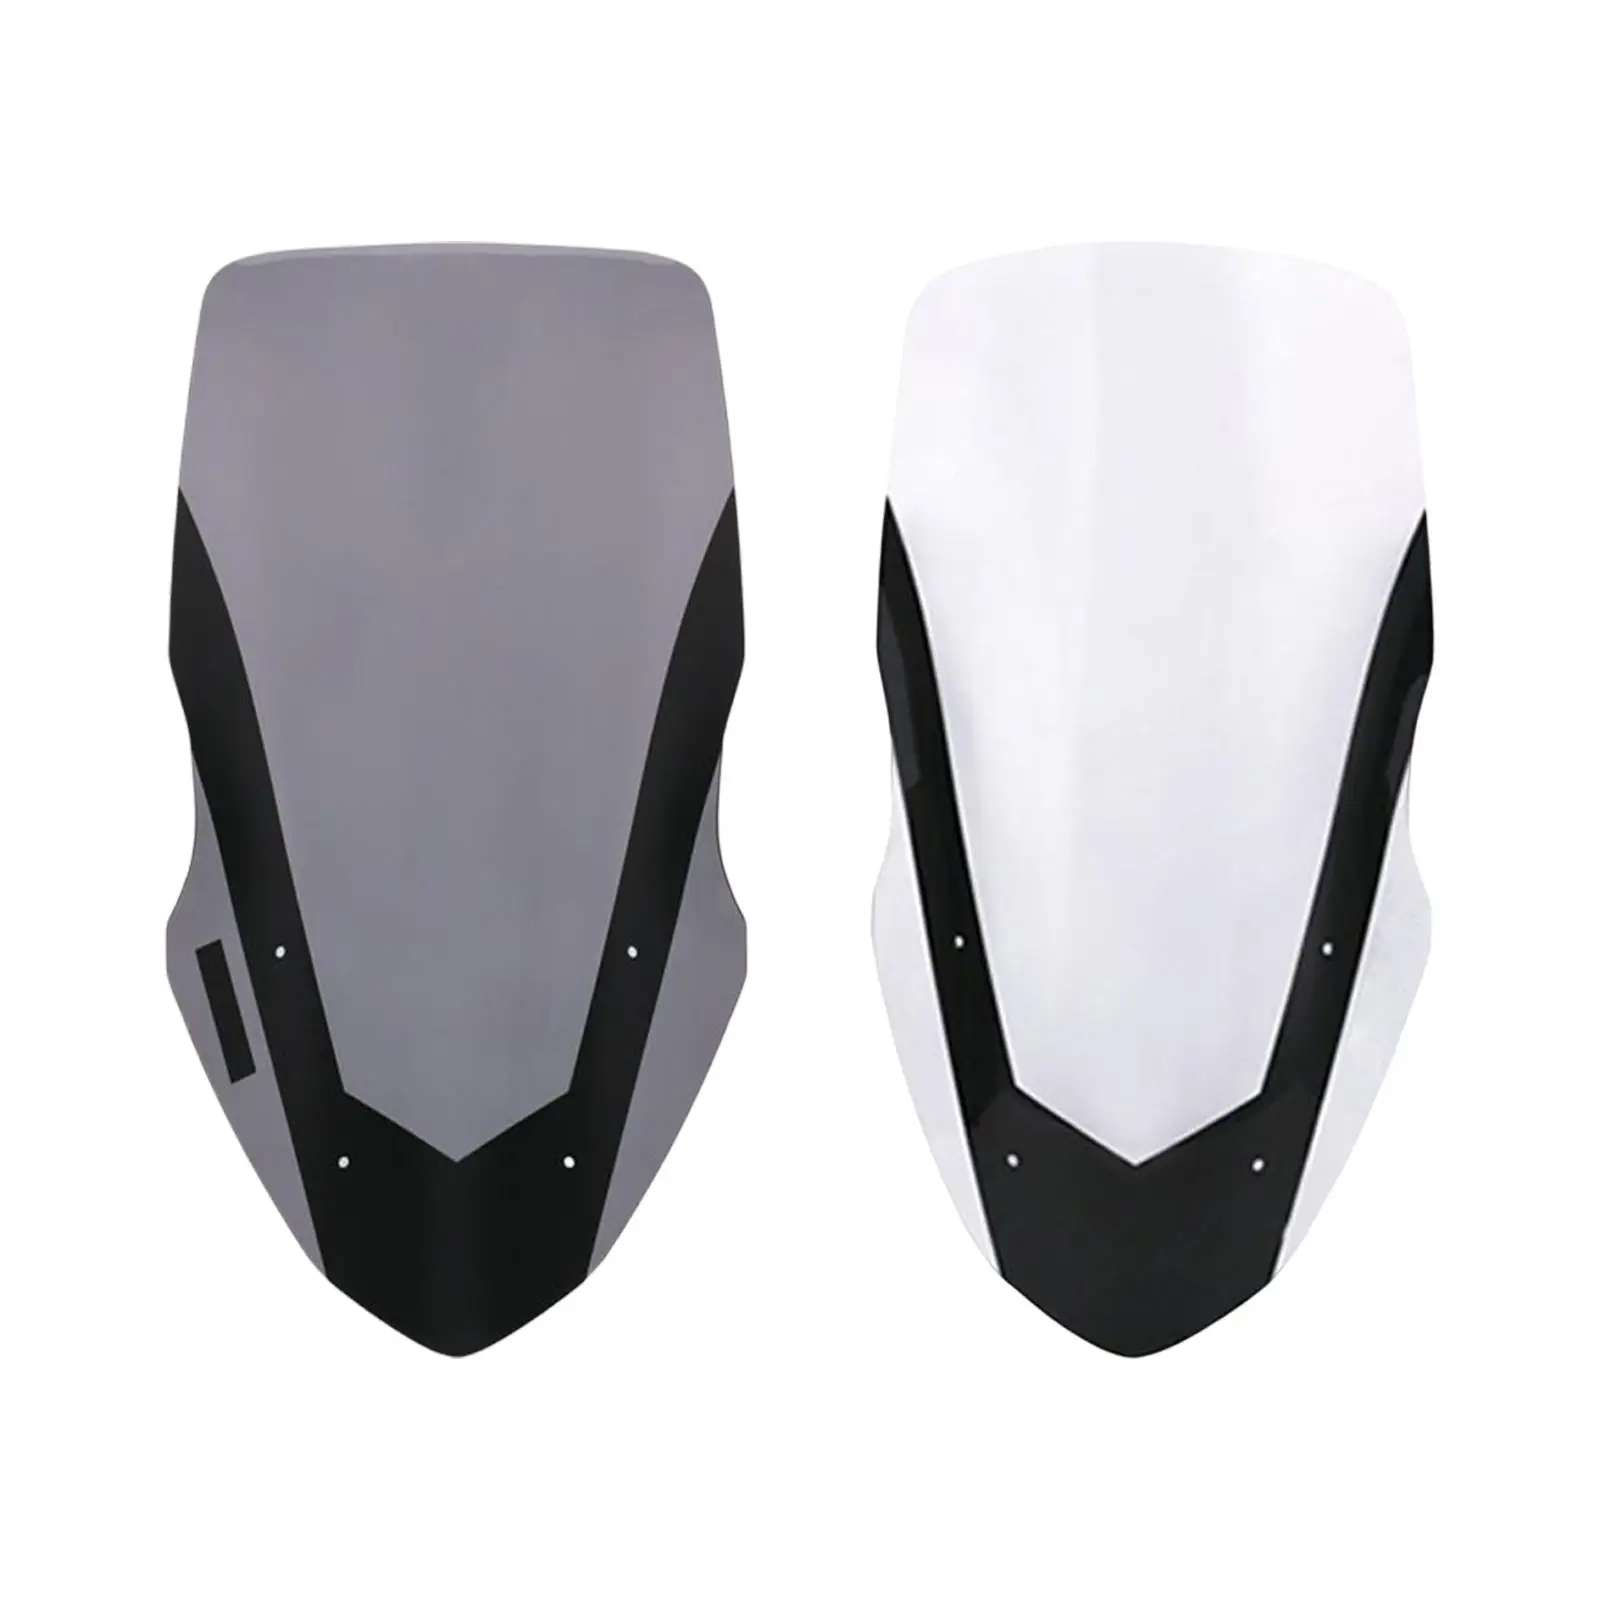 Motorcycle Windshield Wind Screen Deflector Motorbike Windscreen for Yamaha Nmax155 Nmax125 2016-18 Replaces Accessory